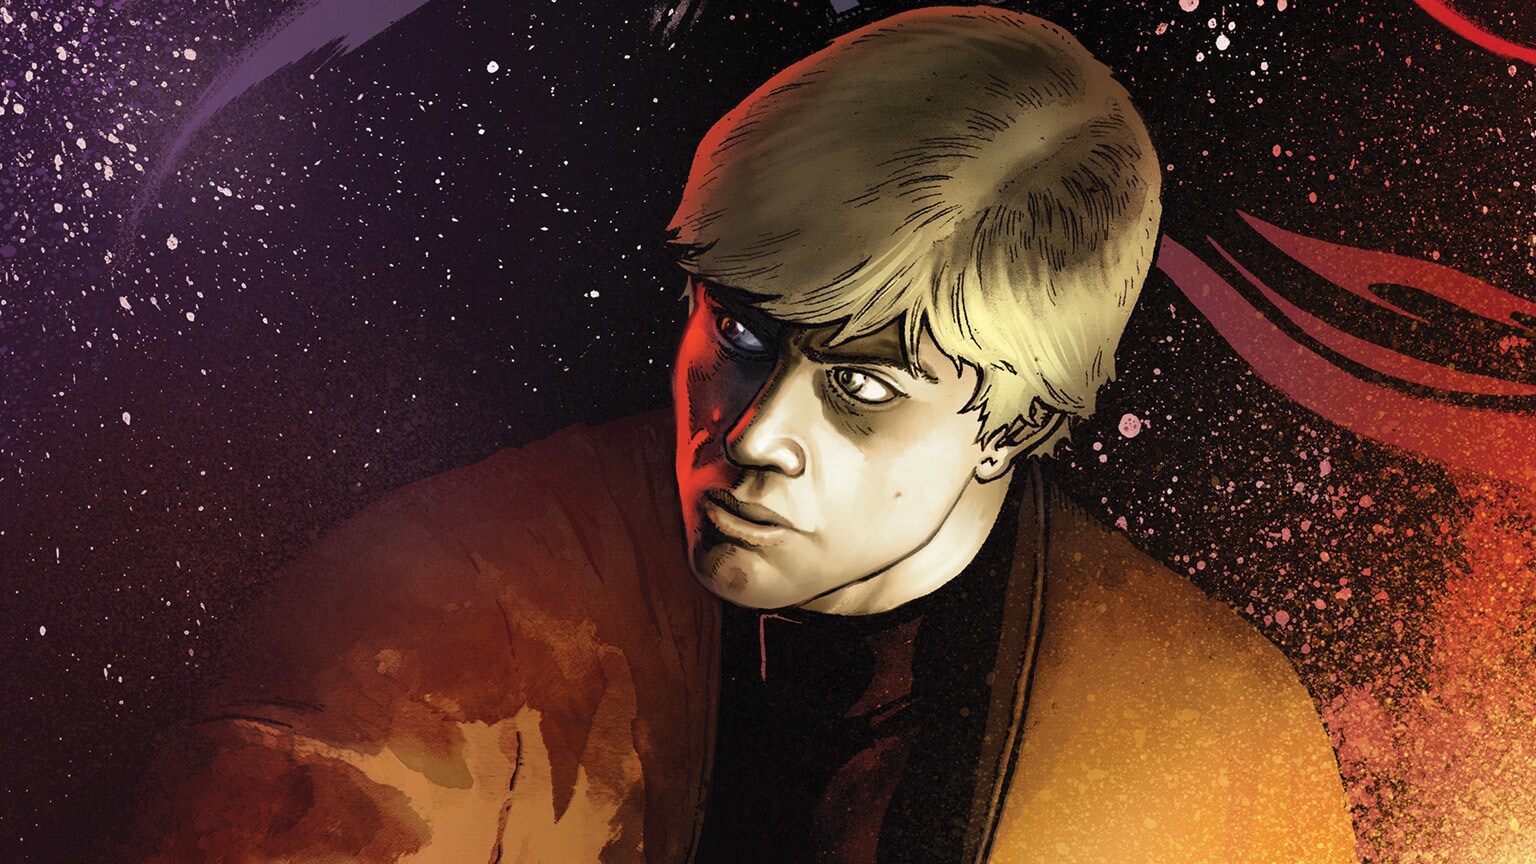 Boushh and Luke Skywalker Join Marvel's War of the Bounty Hunters - Exclusive Previews